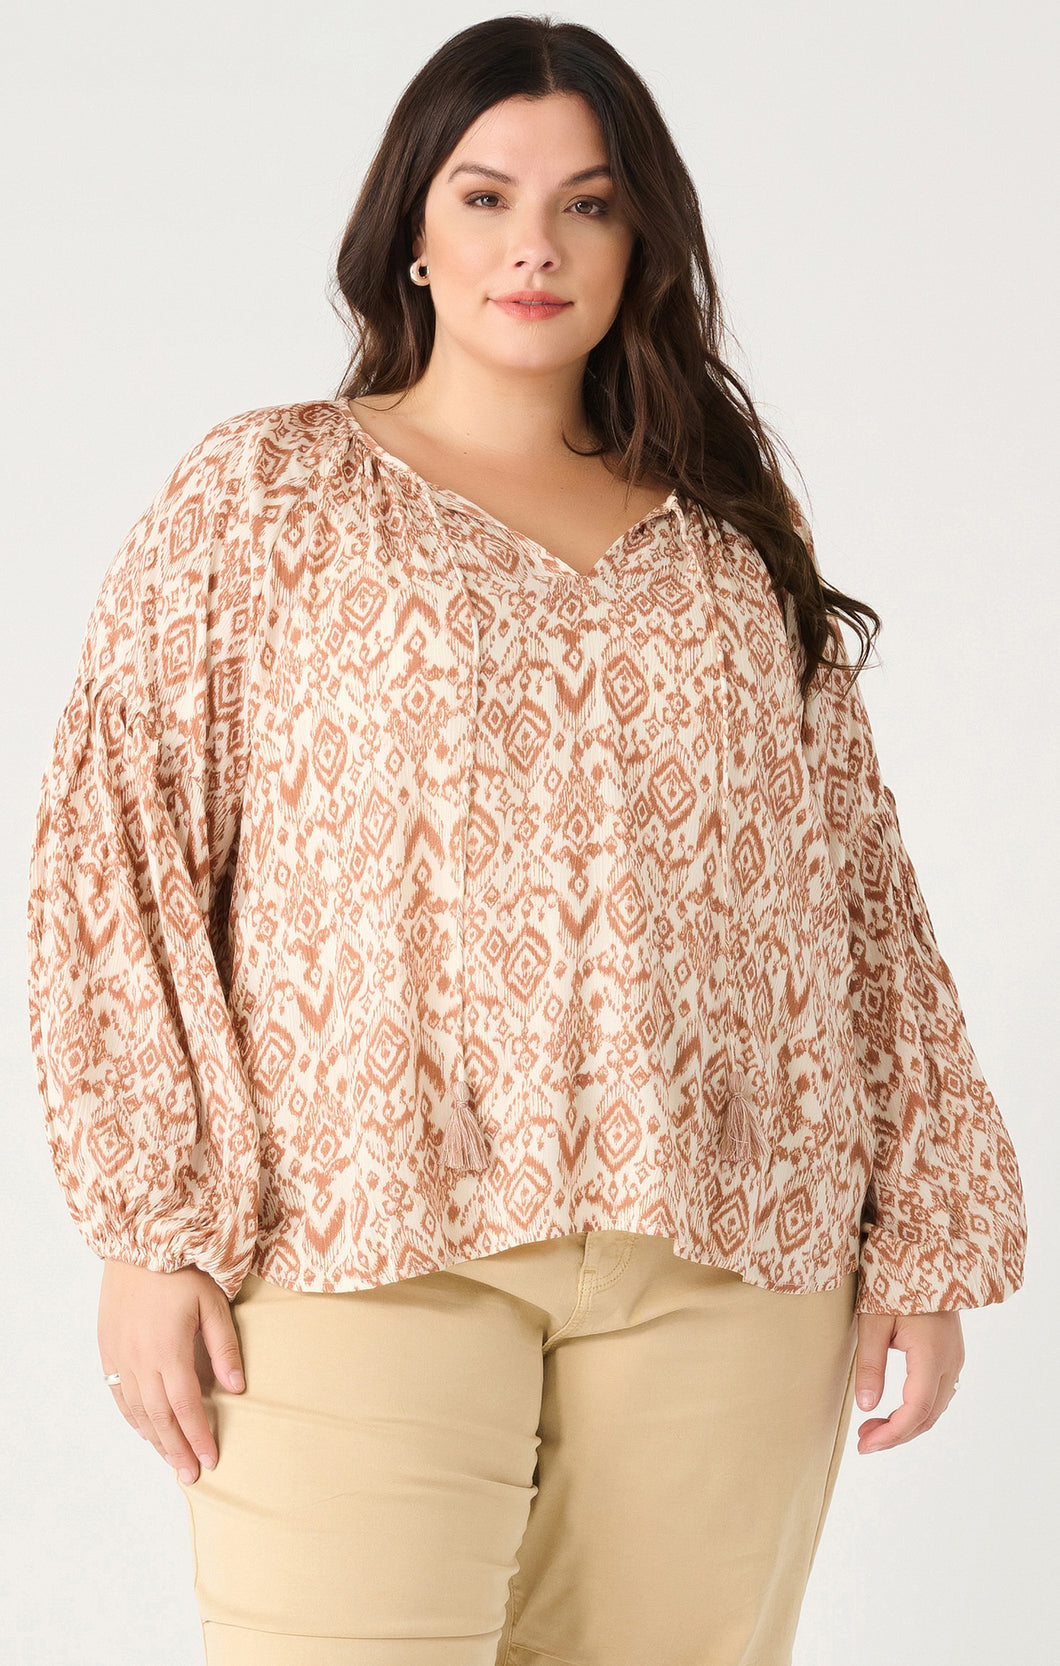 PATTERNED PEASANT BLOUSE by Dex